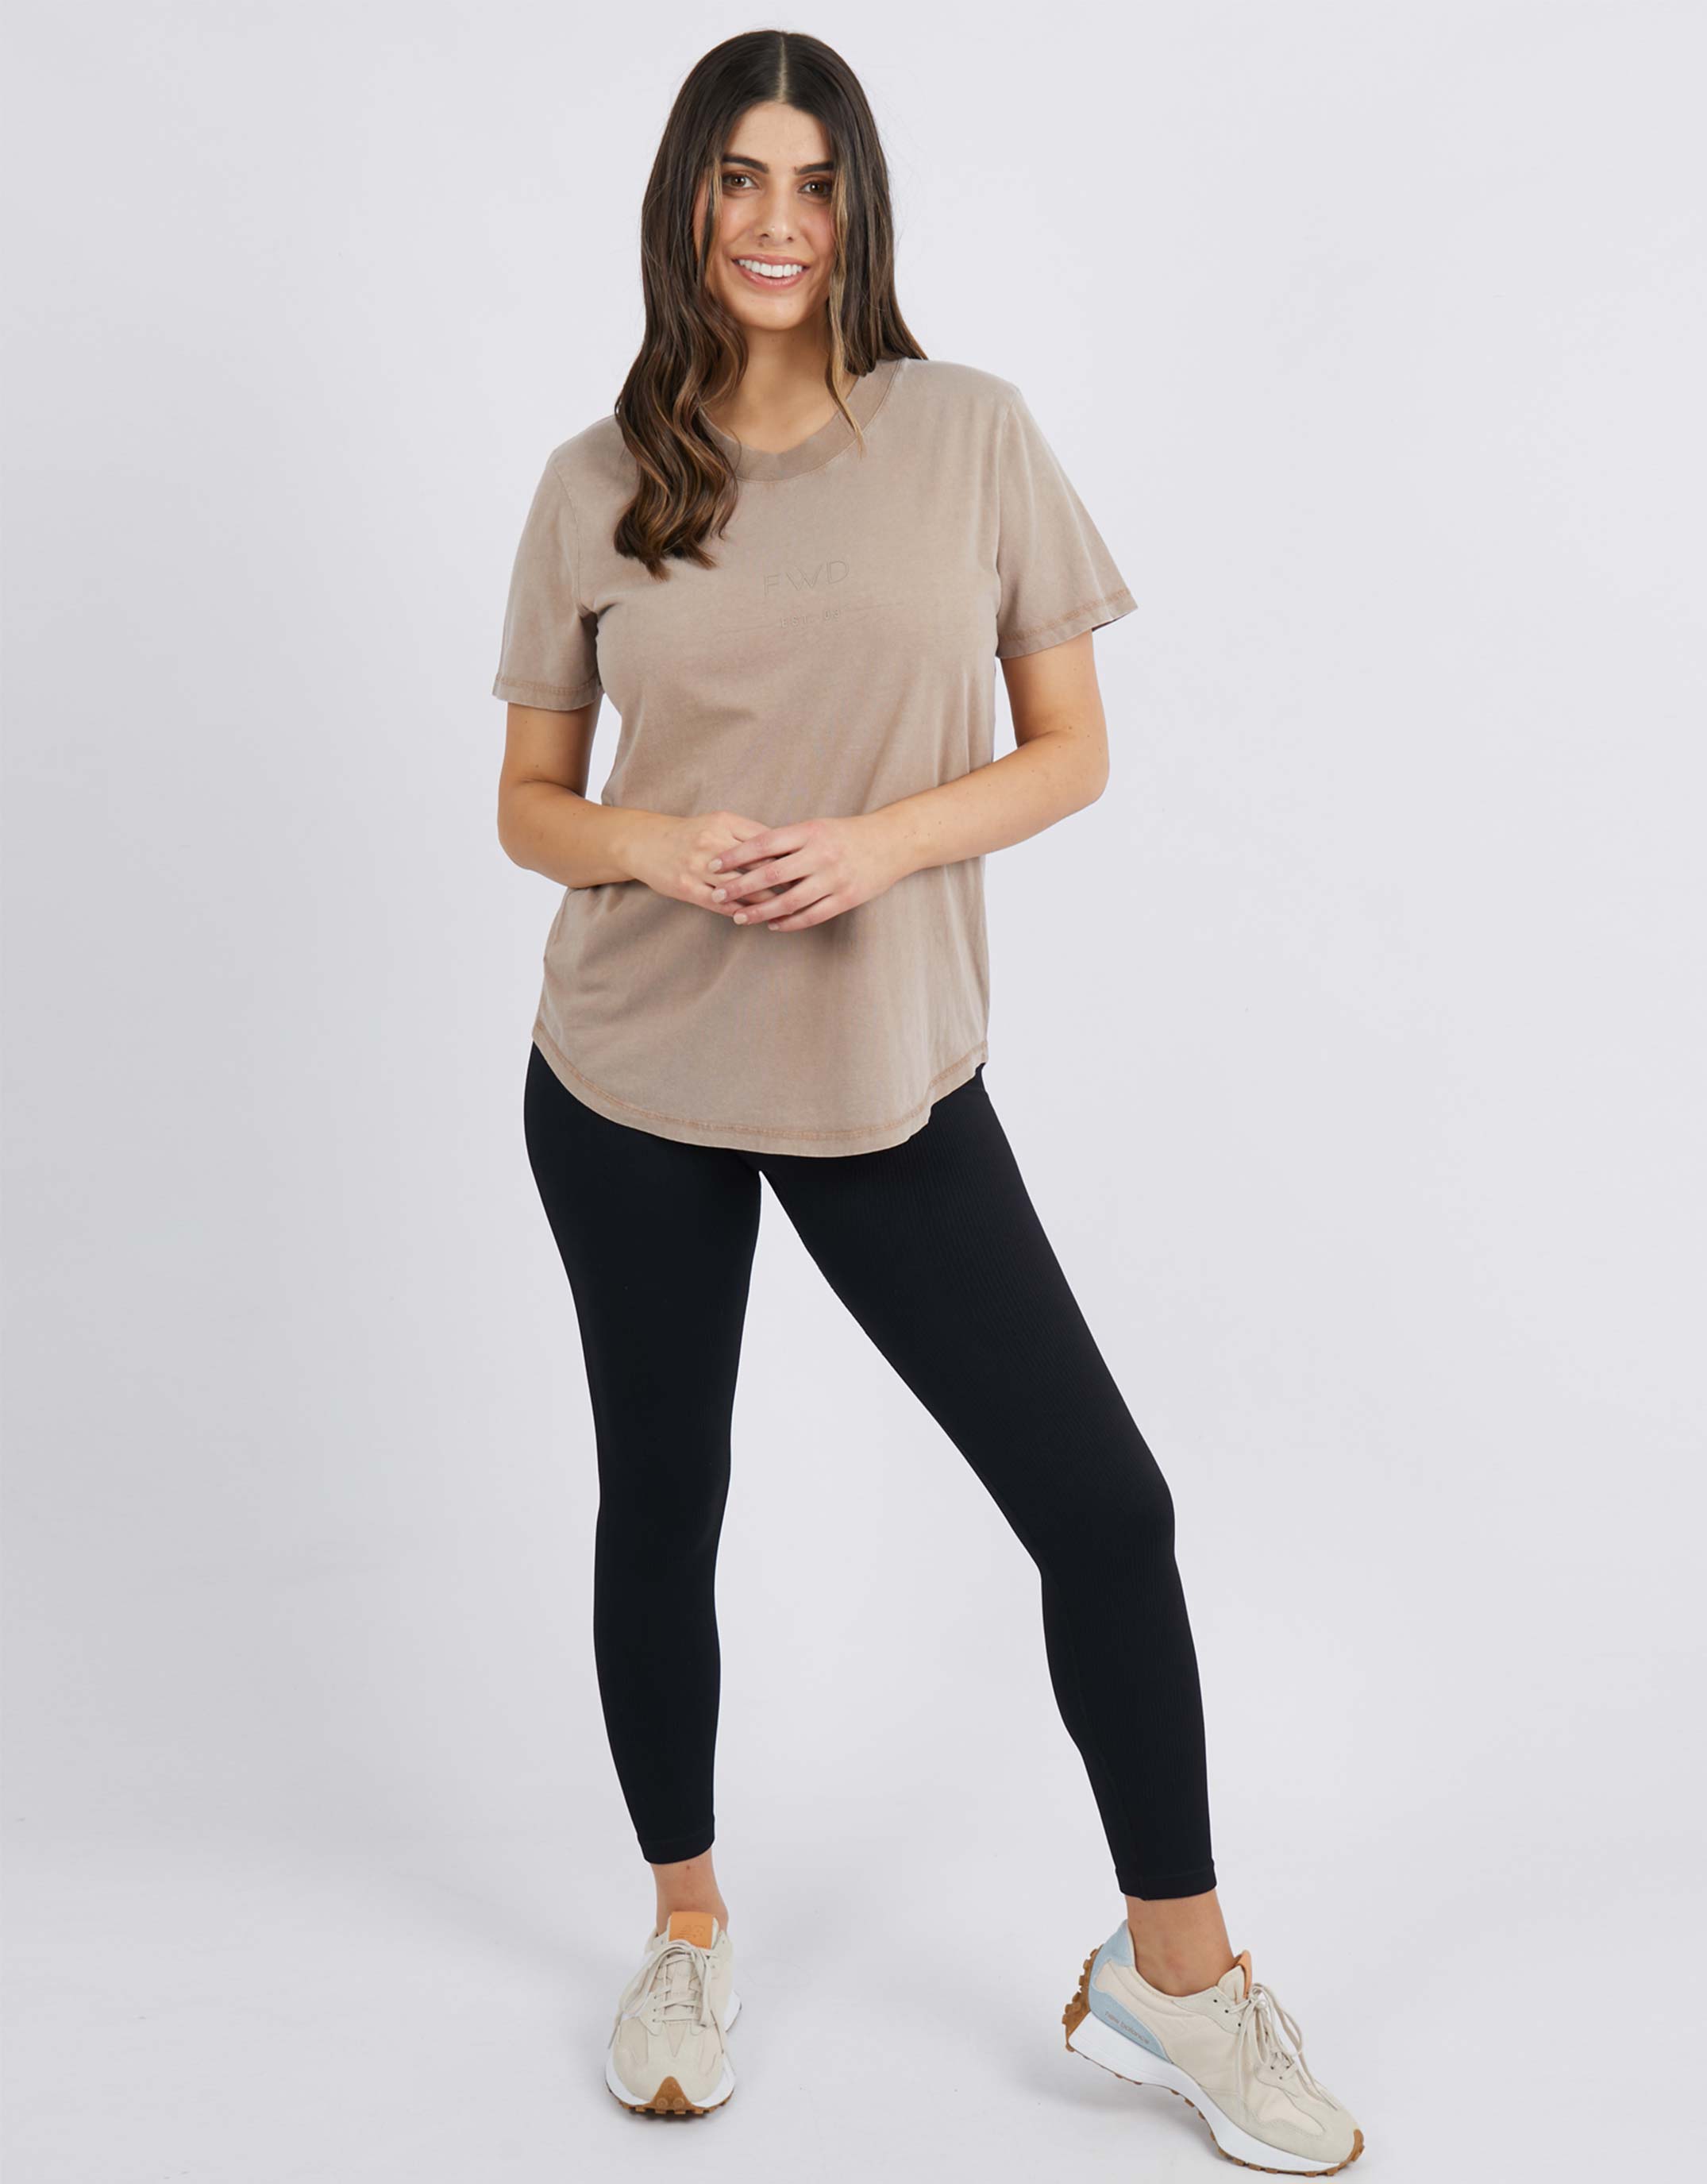 foxwood-fly-tee-sand-womens-clothing